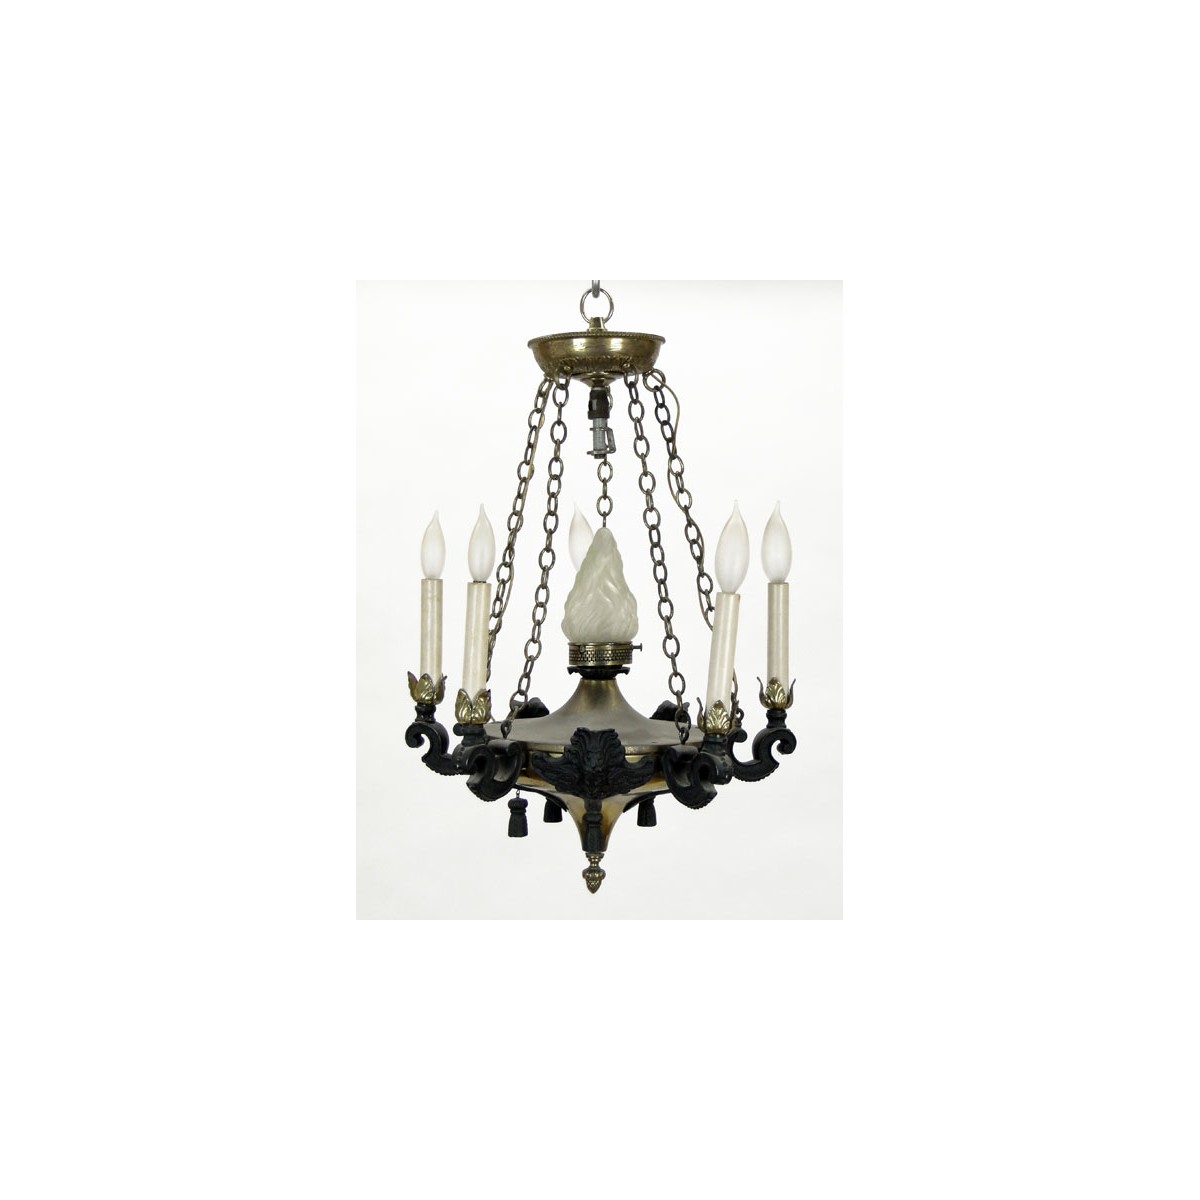 Early 20th Century Neo-Classical Style Six (6) Light Gilt Metal and Patinated Metal Chandelier. Uns